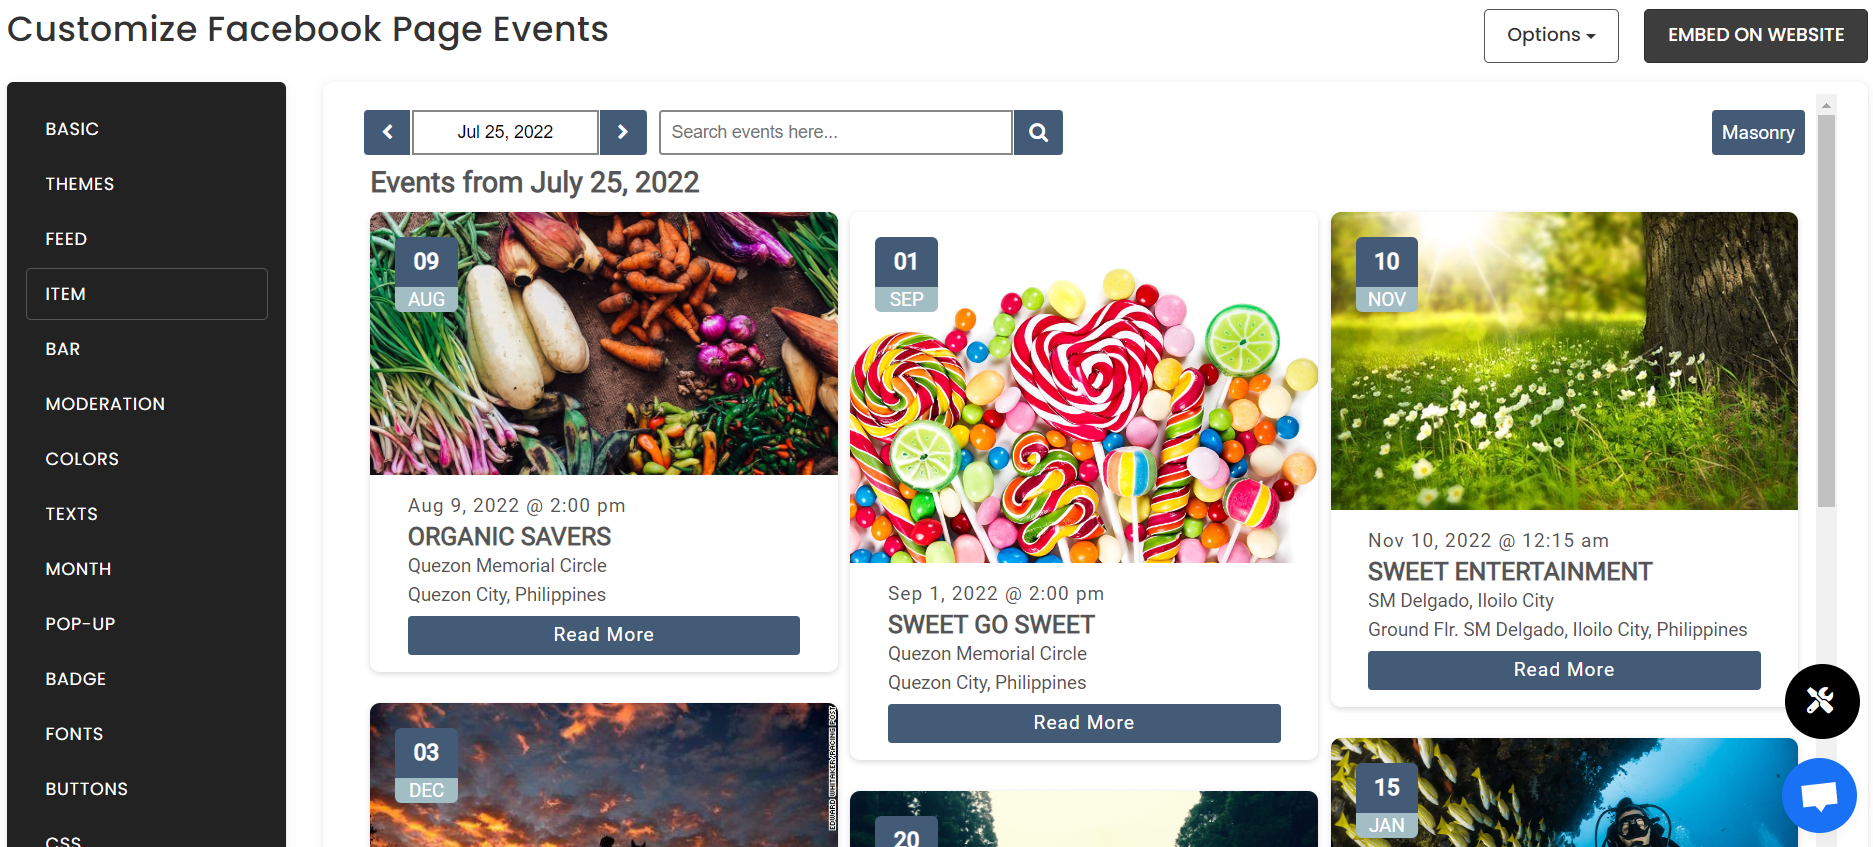 Customize your feed - Free Facebook Page Events Widget For Shopify Website